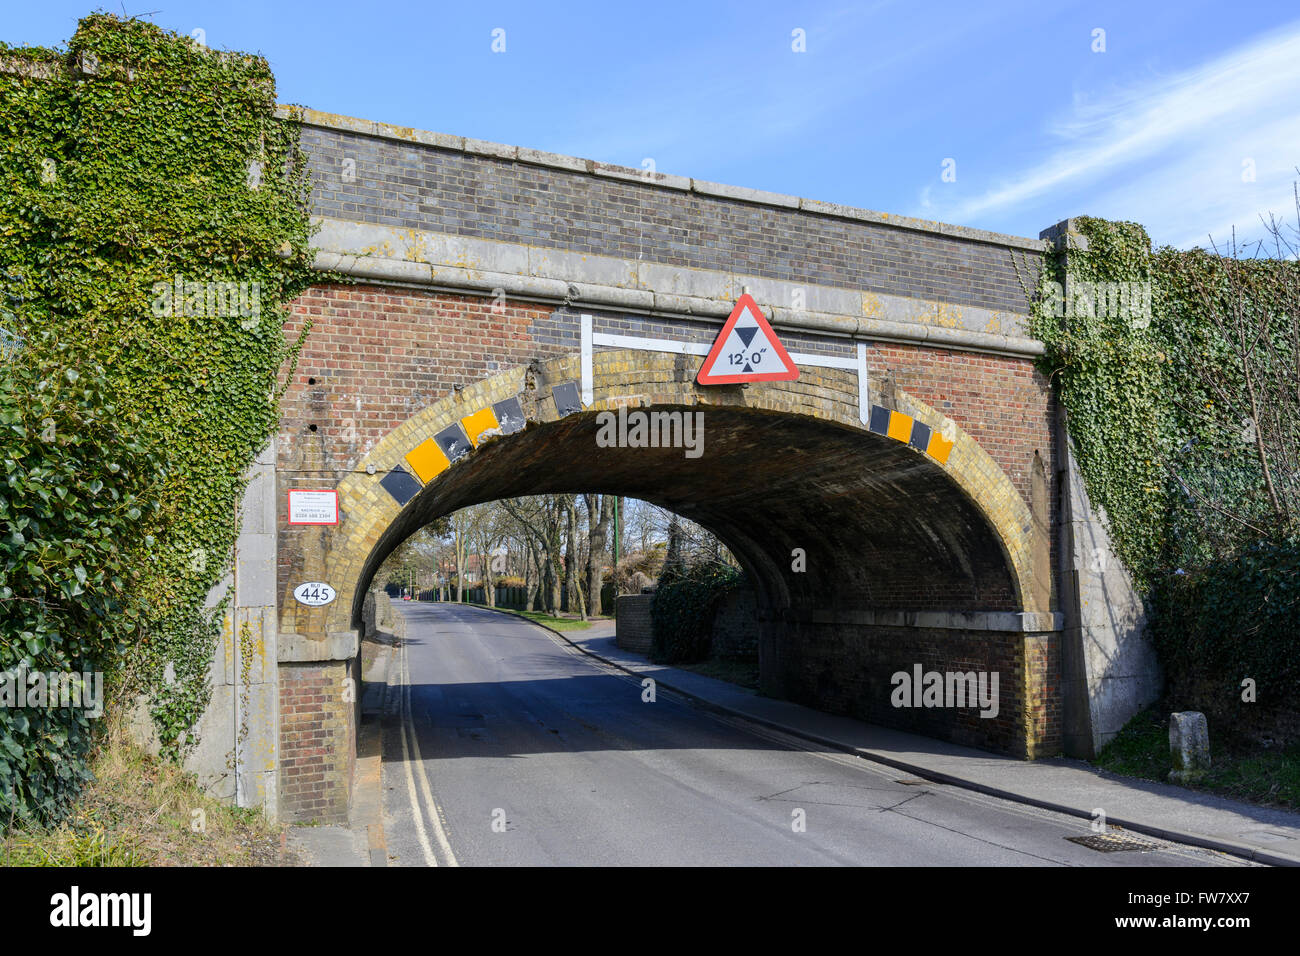 Brick railway bridge with height restriction sign across a road in England, UK. Stock Photo